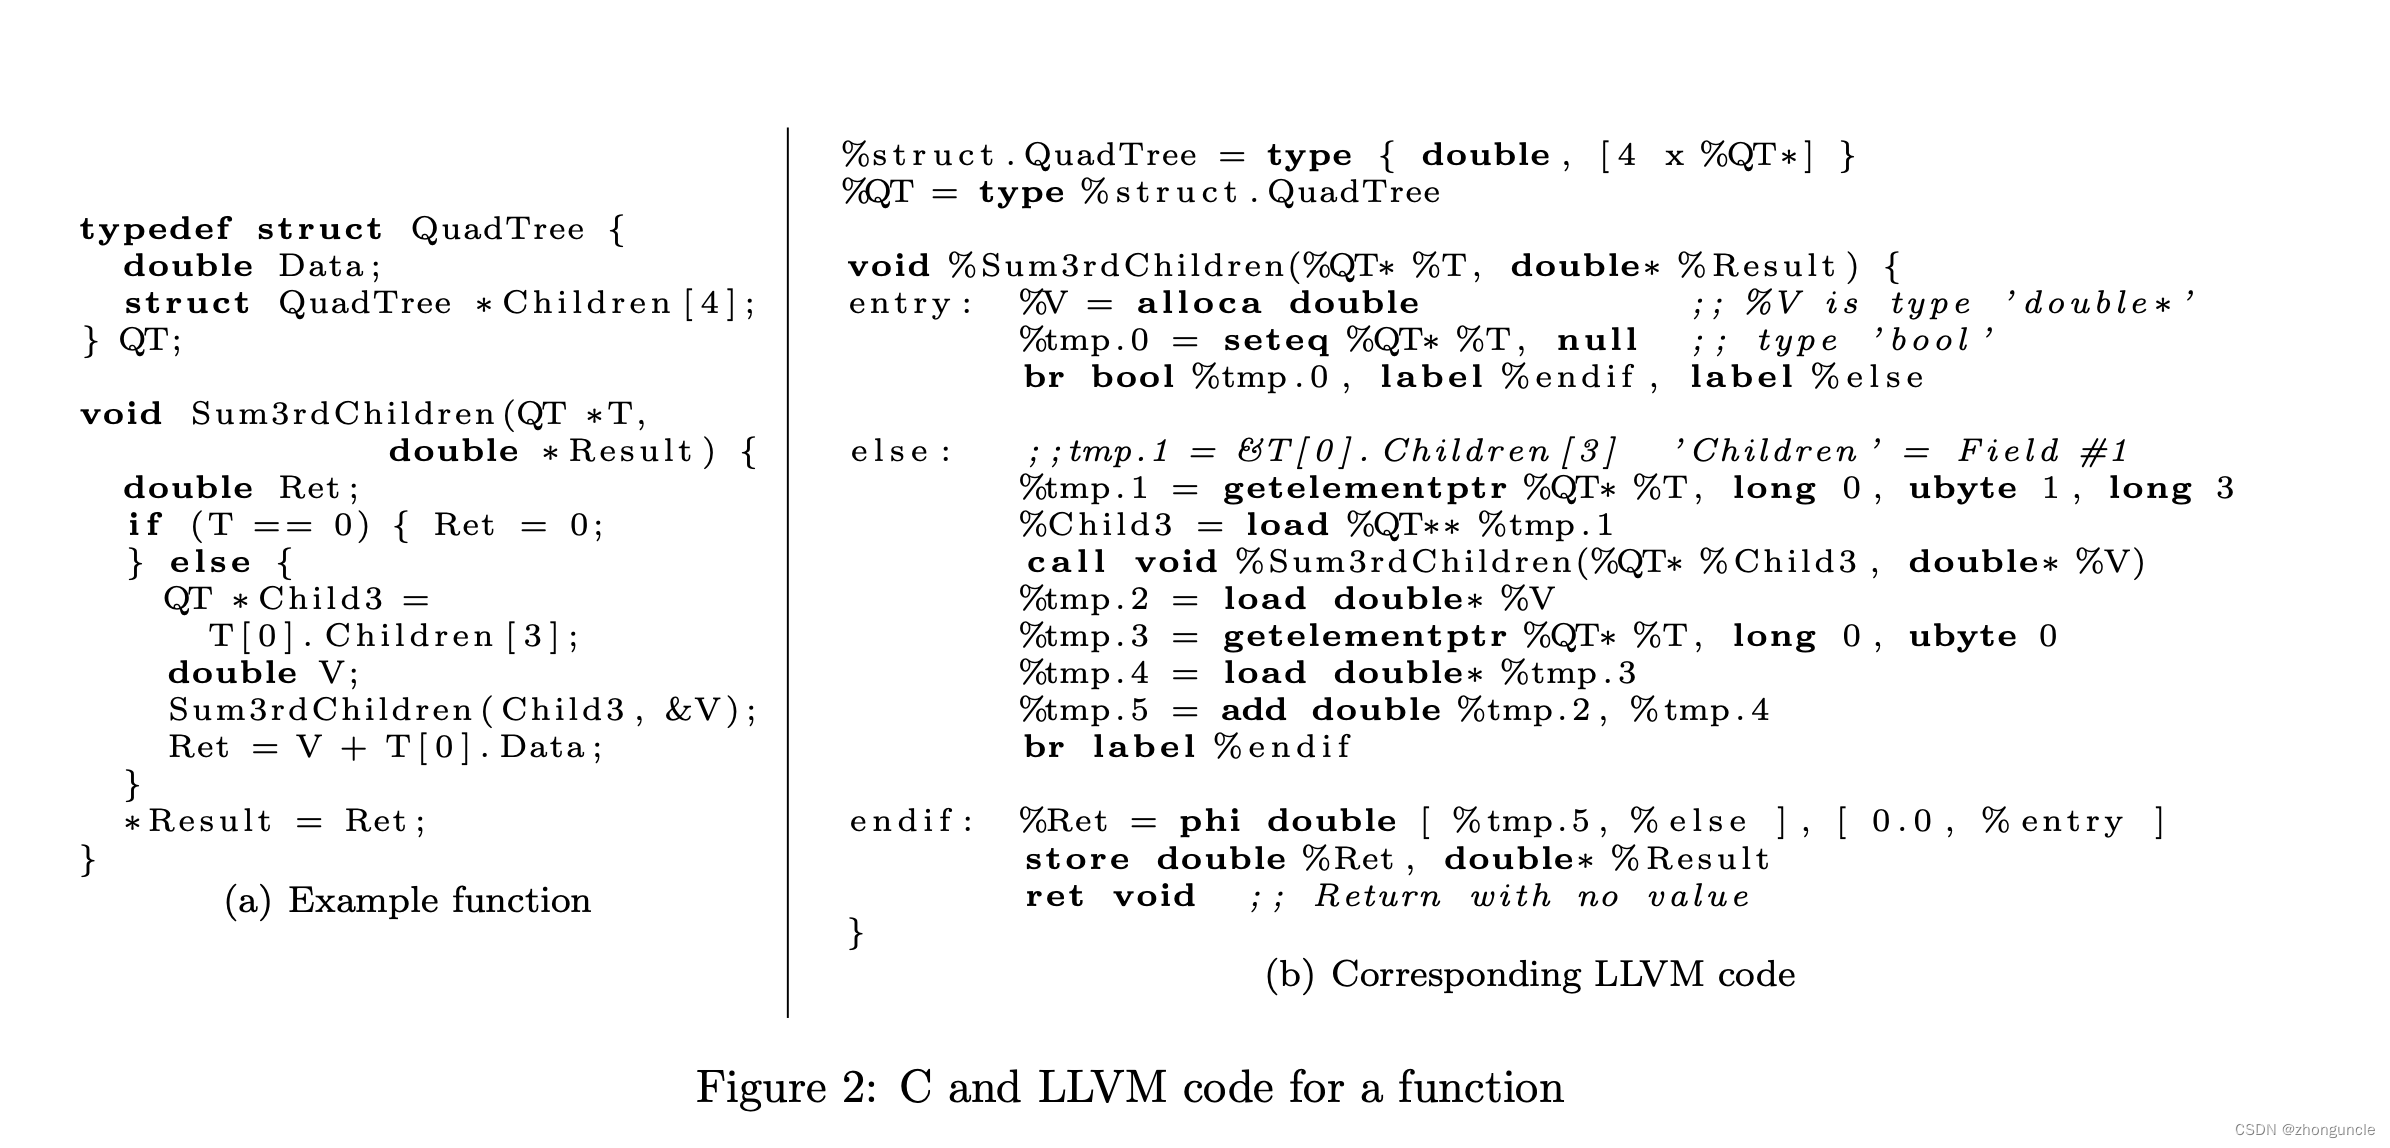 LLVM code and C code